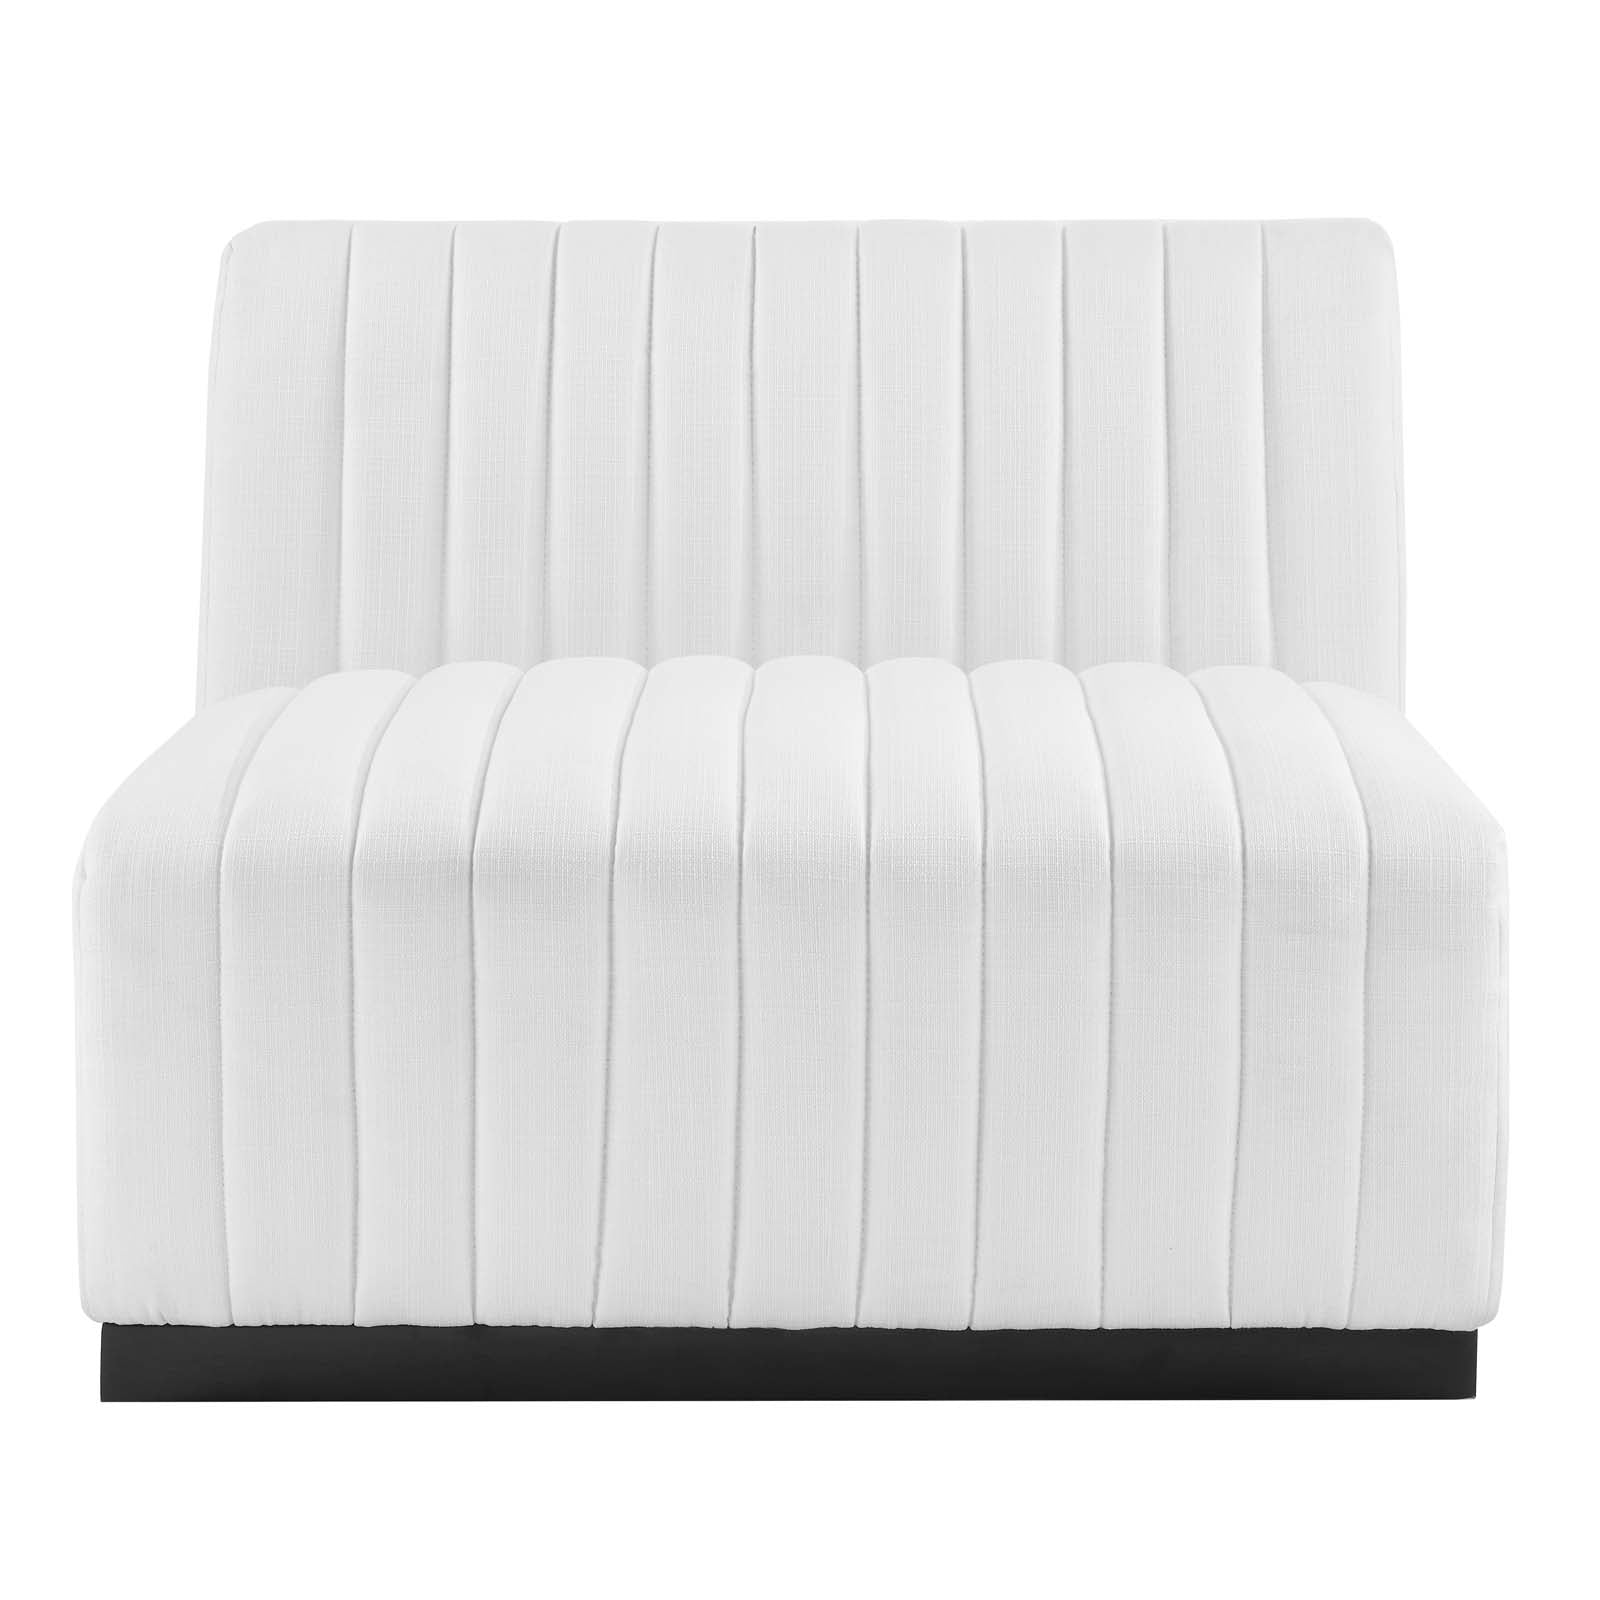 Modway Sectional Sofas - Conjure Channel Tufted Upholstered Fabric 5-Piece 119 " L Sectional Black White